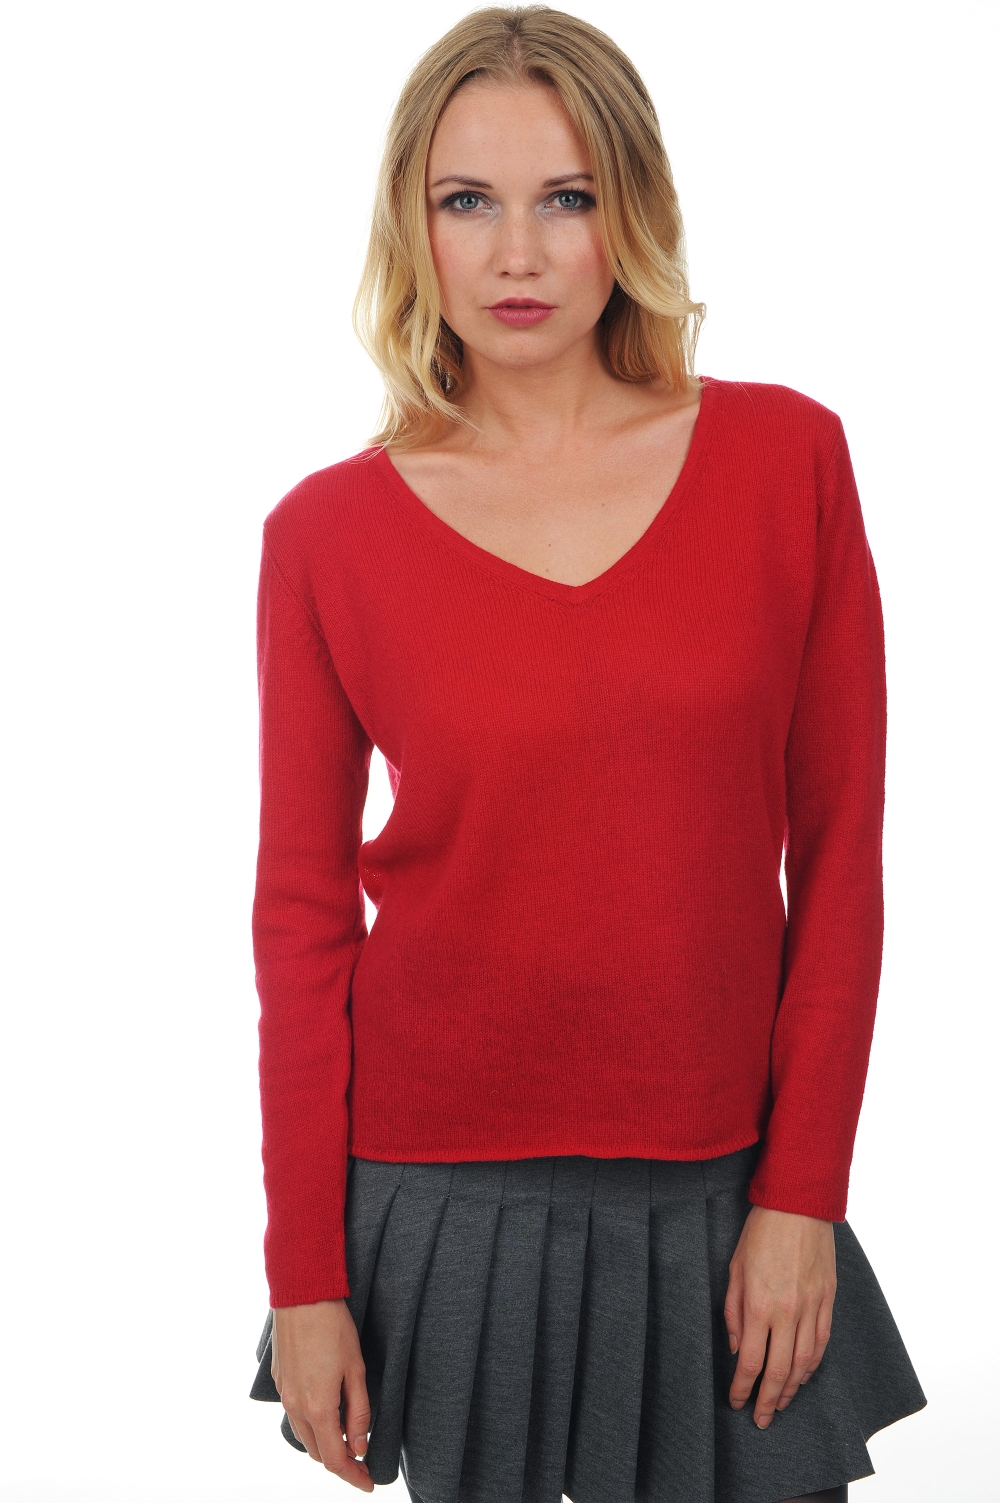 Cashmere ladies basic sweaters at low prices flavie blood red m